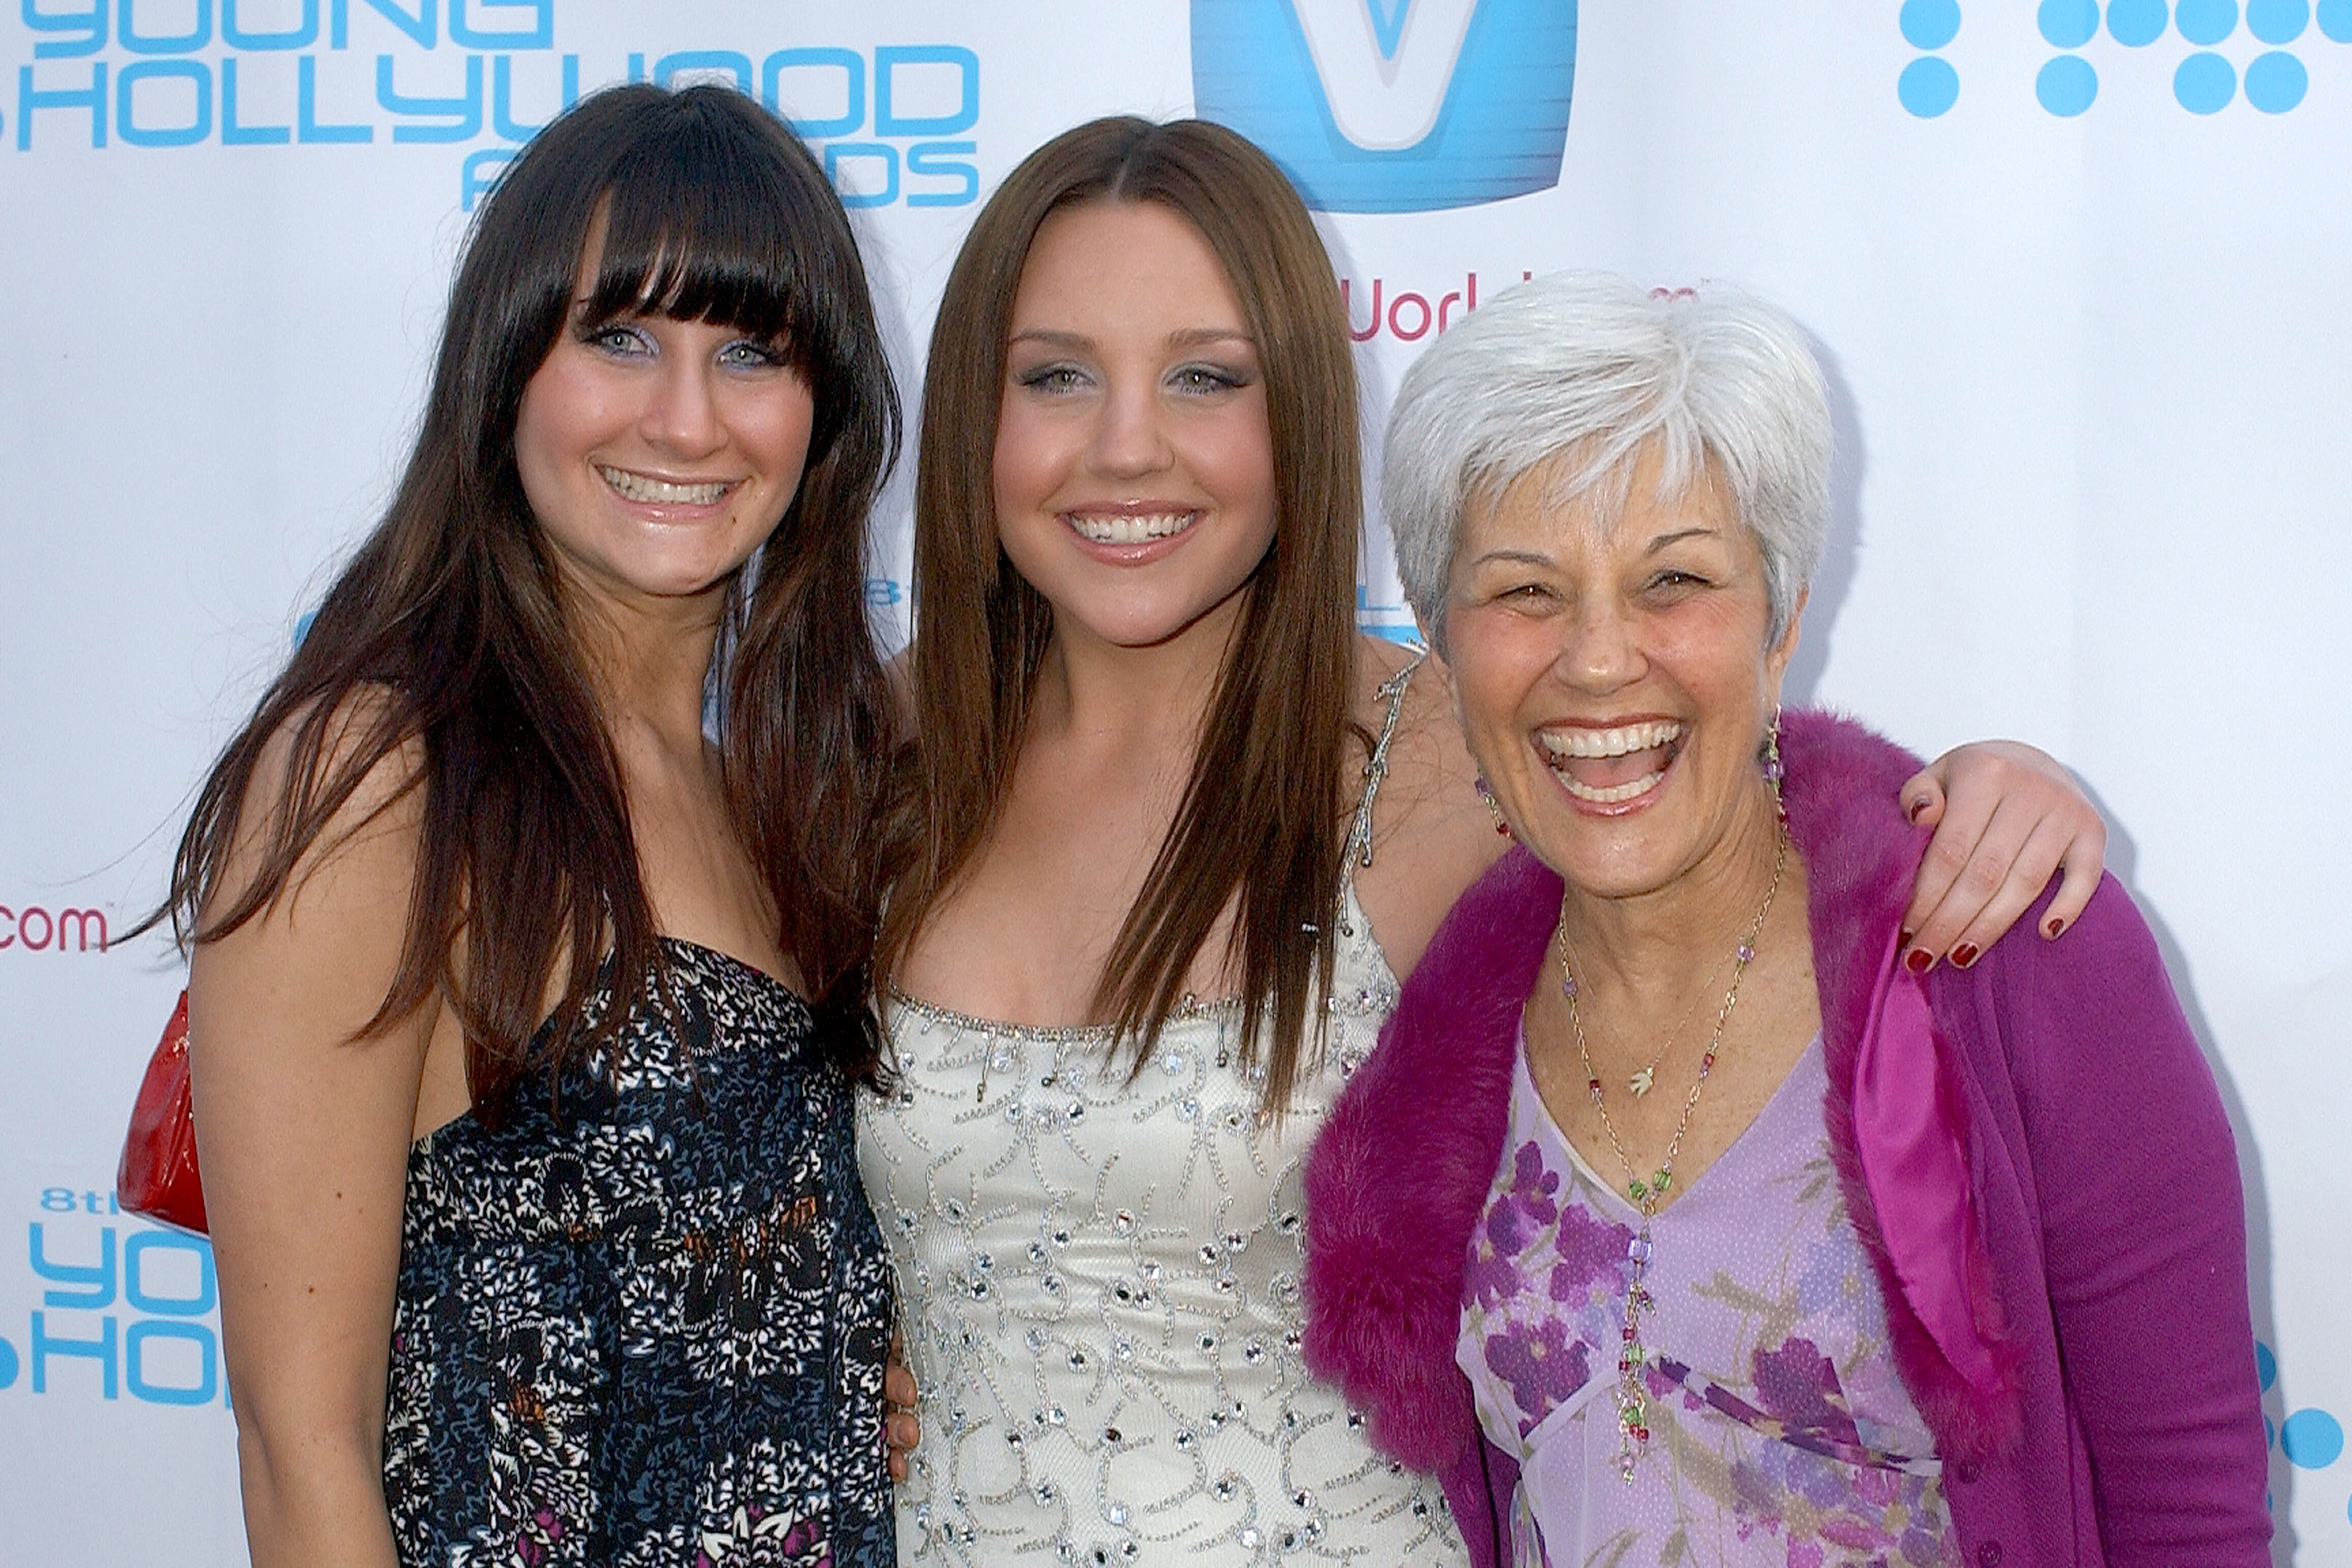 Amanda Bynes with sister and mom in Hollywood, California, on April 30, 2006 | Source: Getty Images